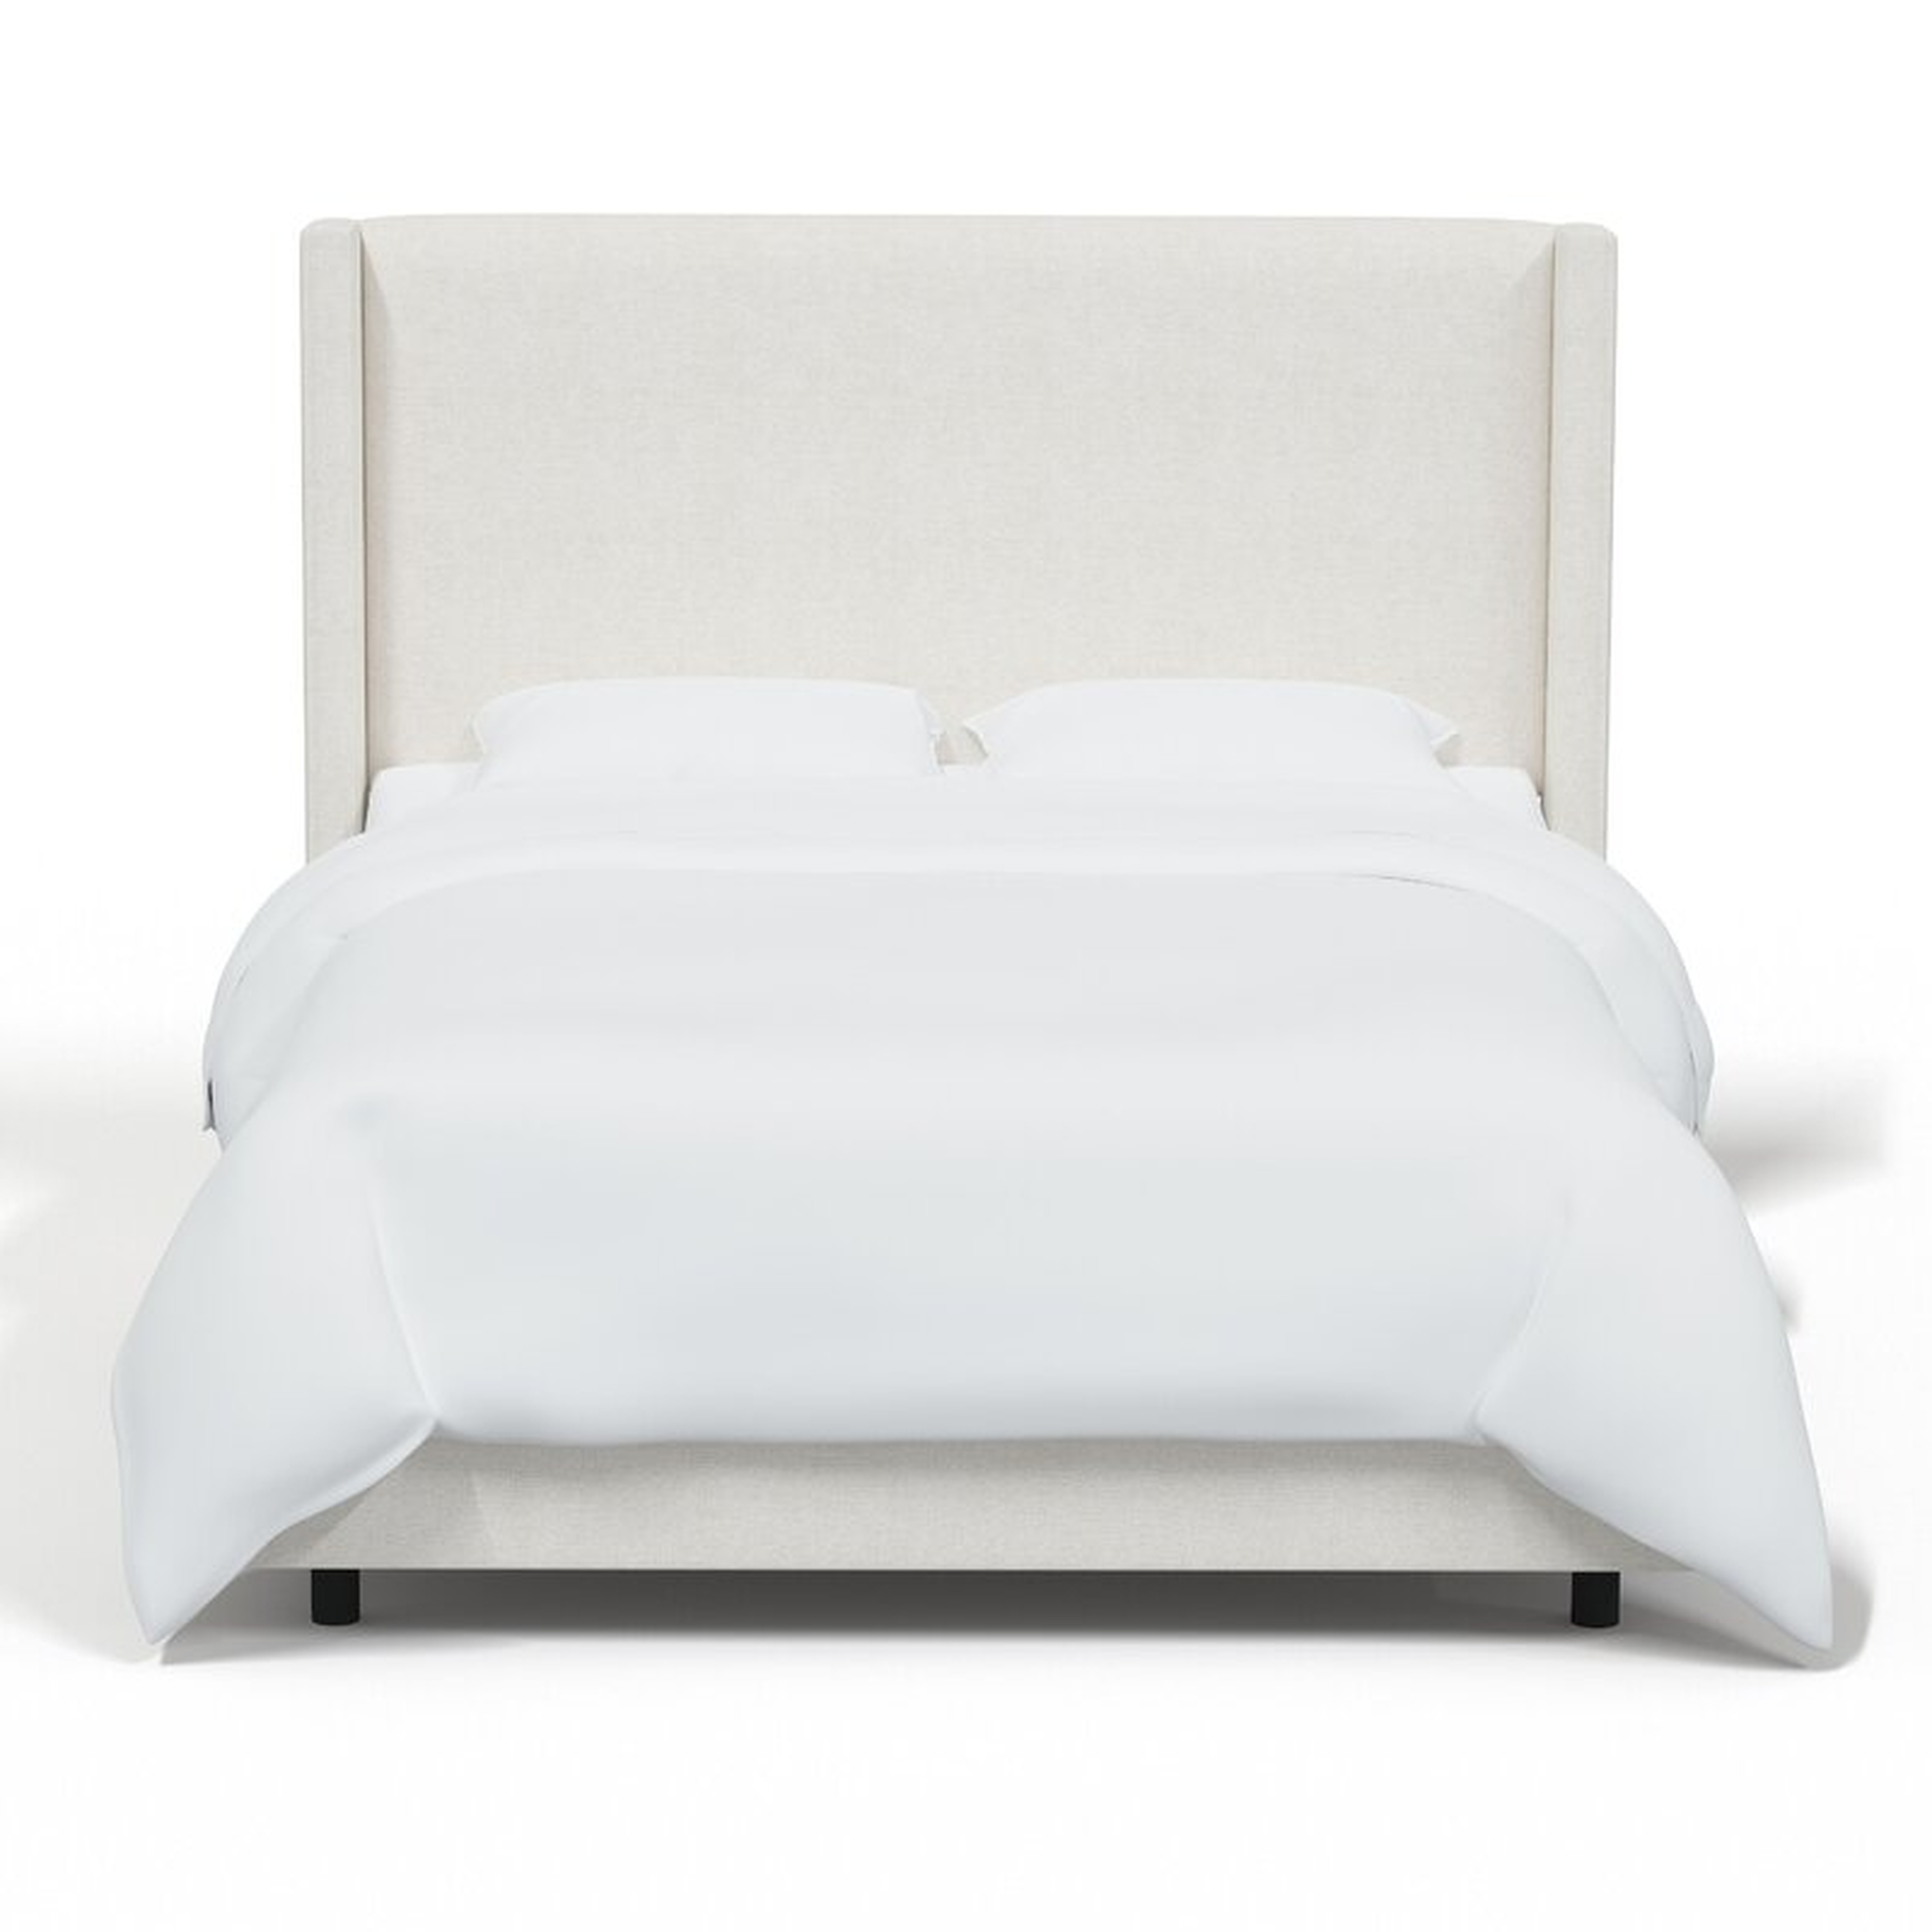 Hanson Upholstered Bed - Zuma White - Solid Color - King - Wayfair